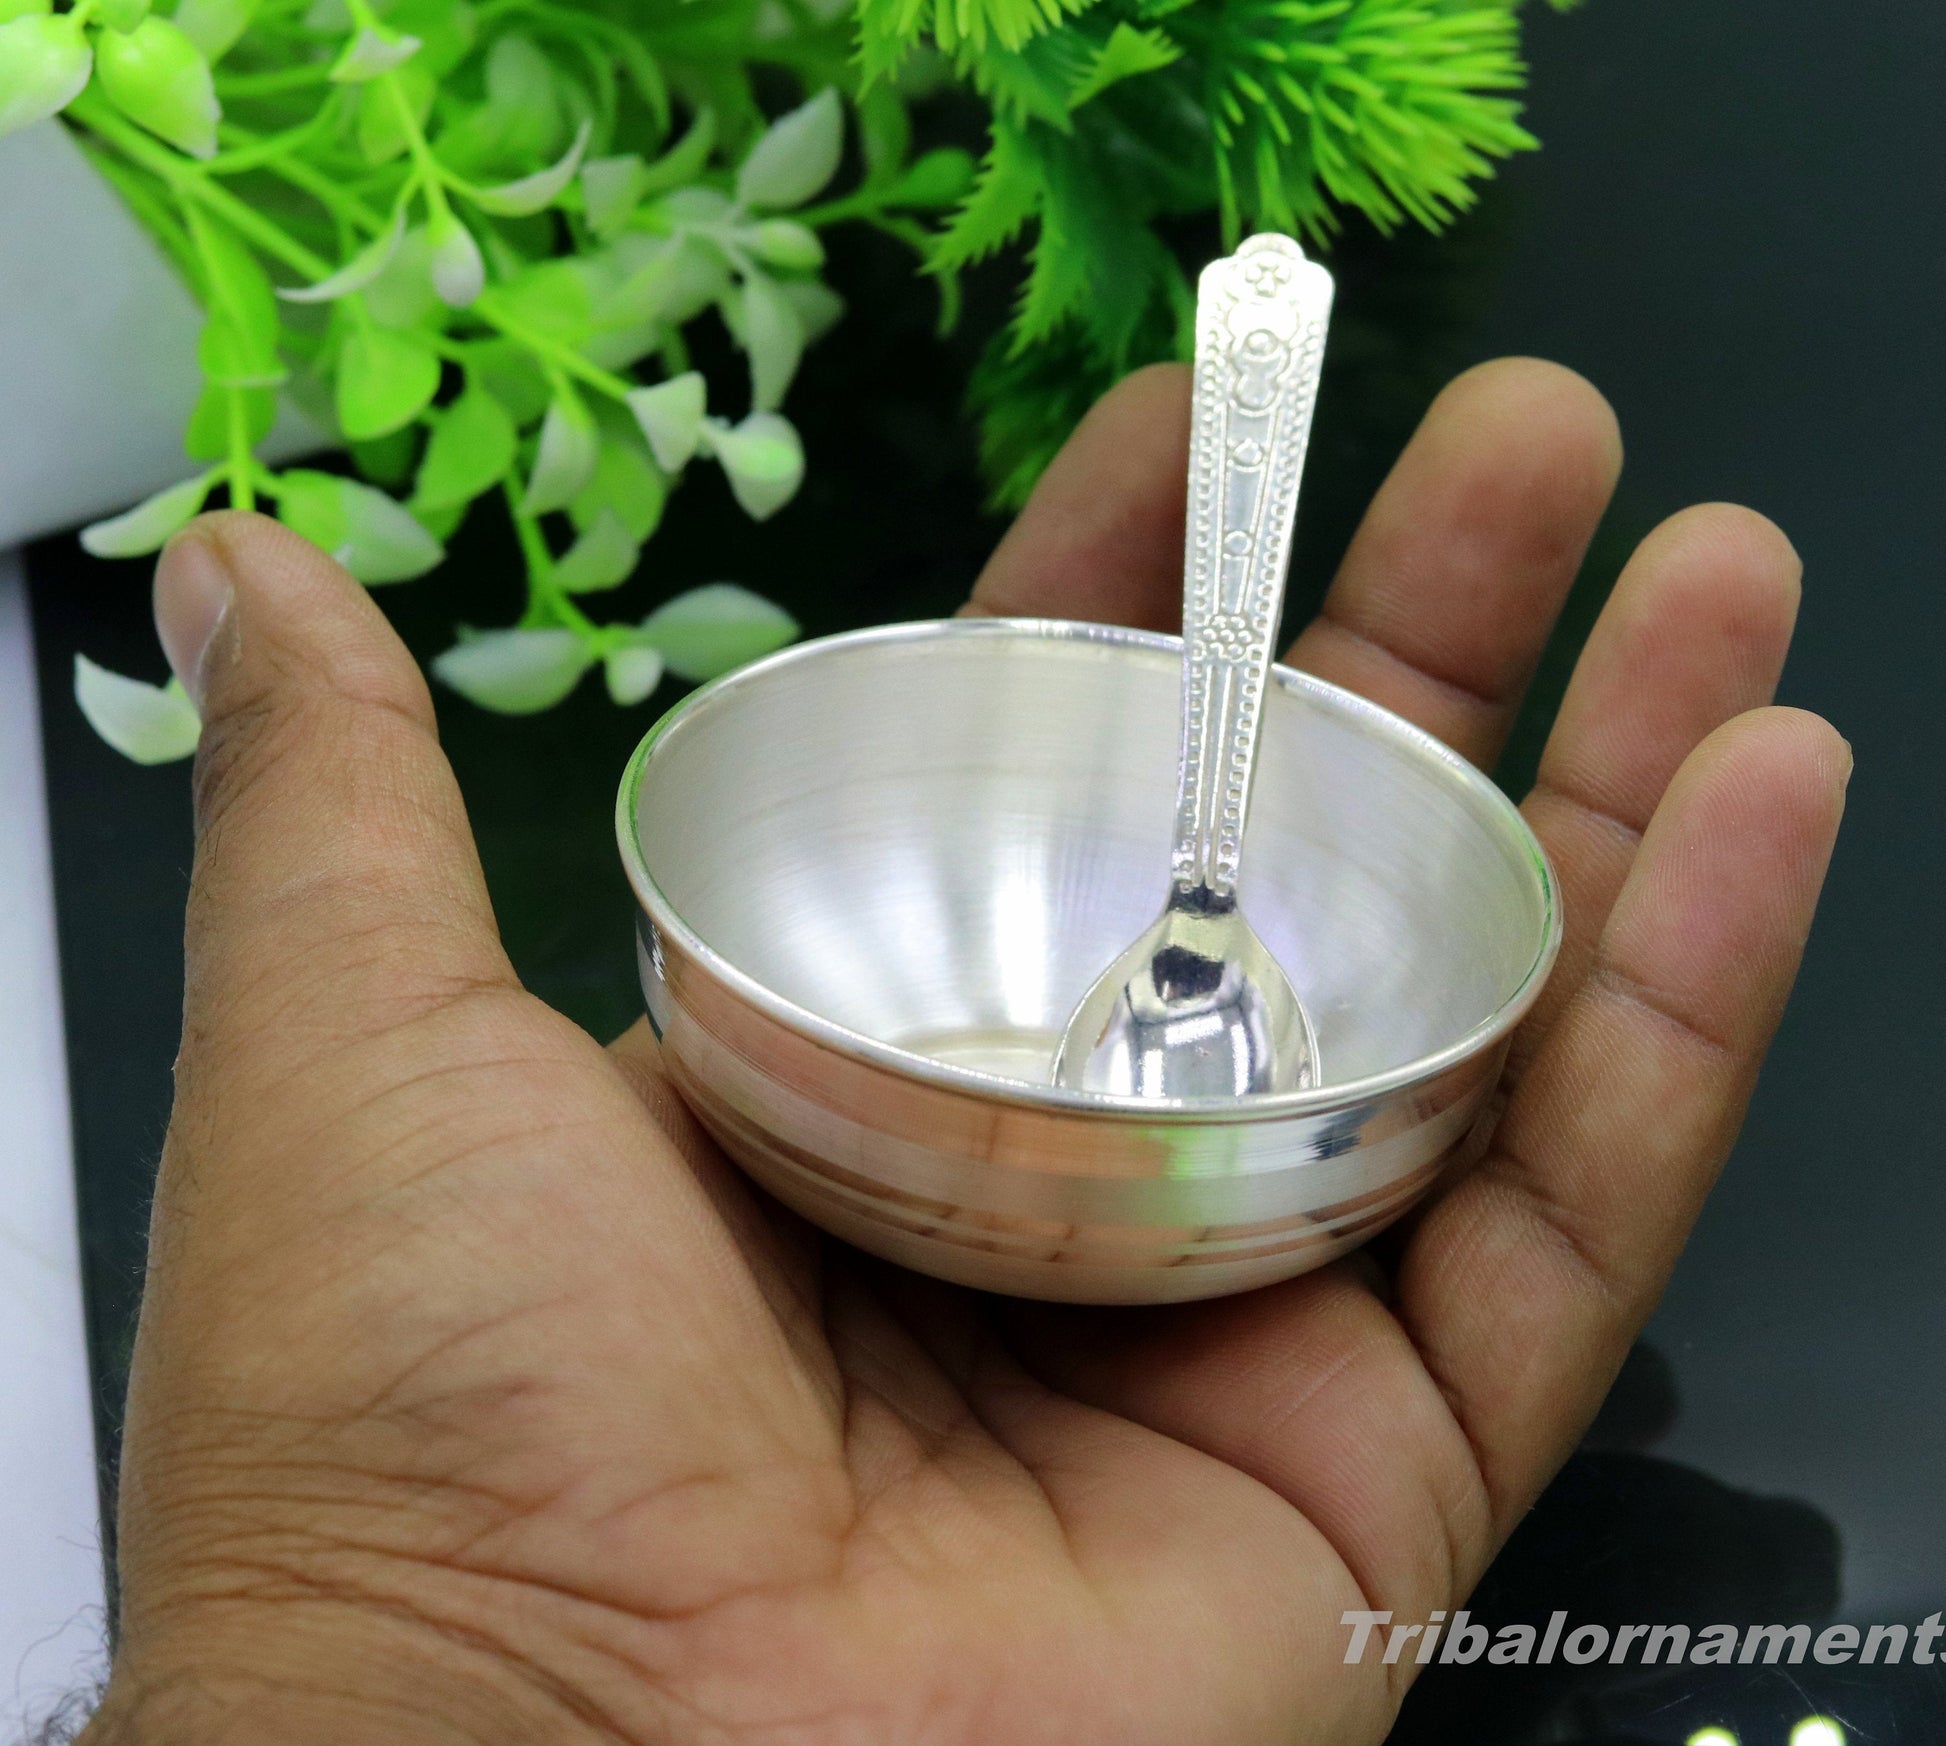 999 fine solid silver handmade small bowl for baby food, pure silver vessels, silver utensils, home and kitchen accessories india sv30 - TRIBAL ORNAMENTS